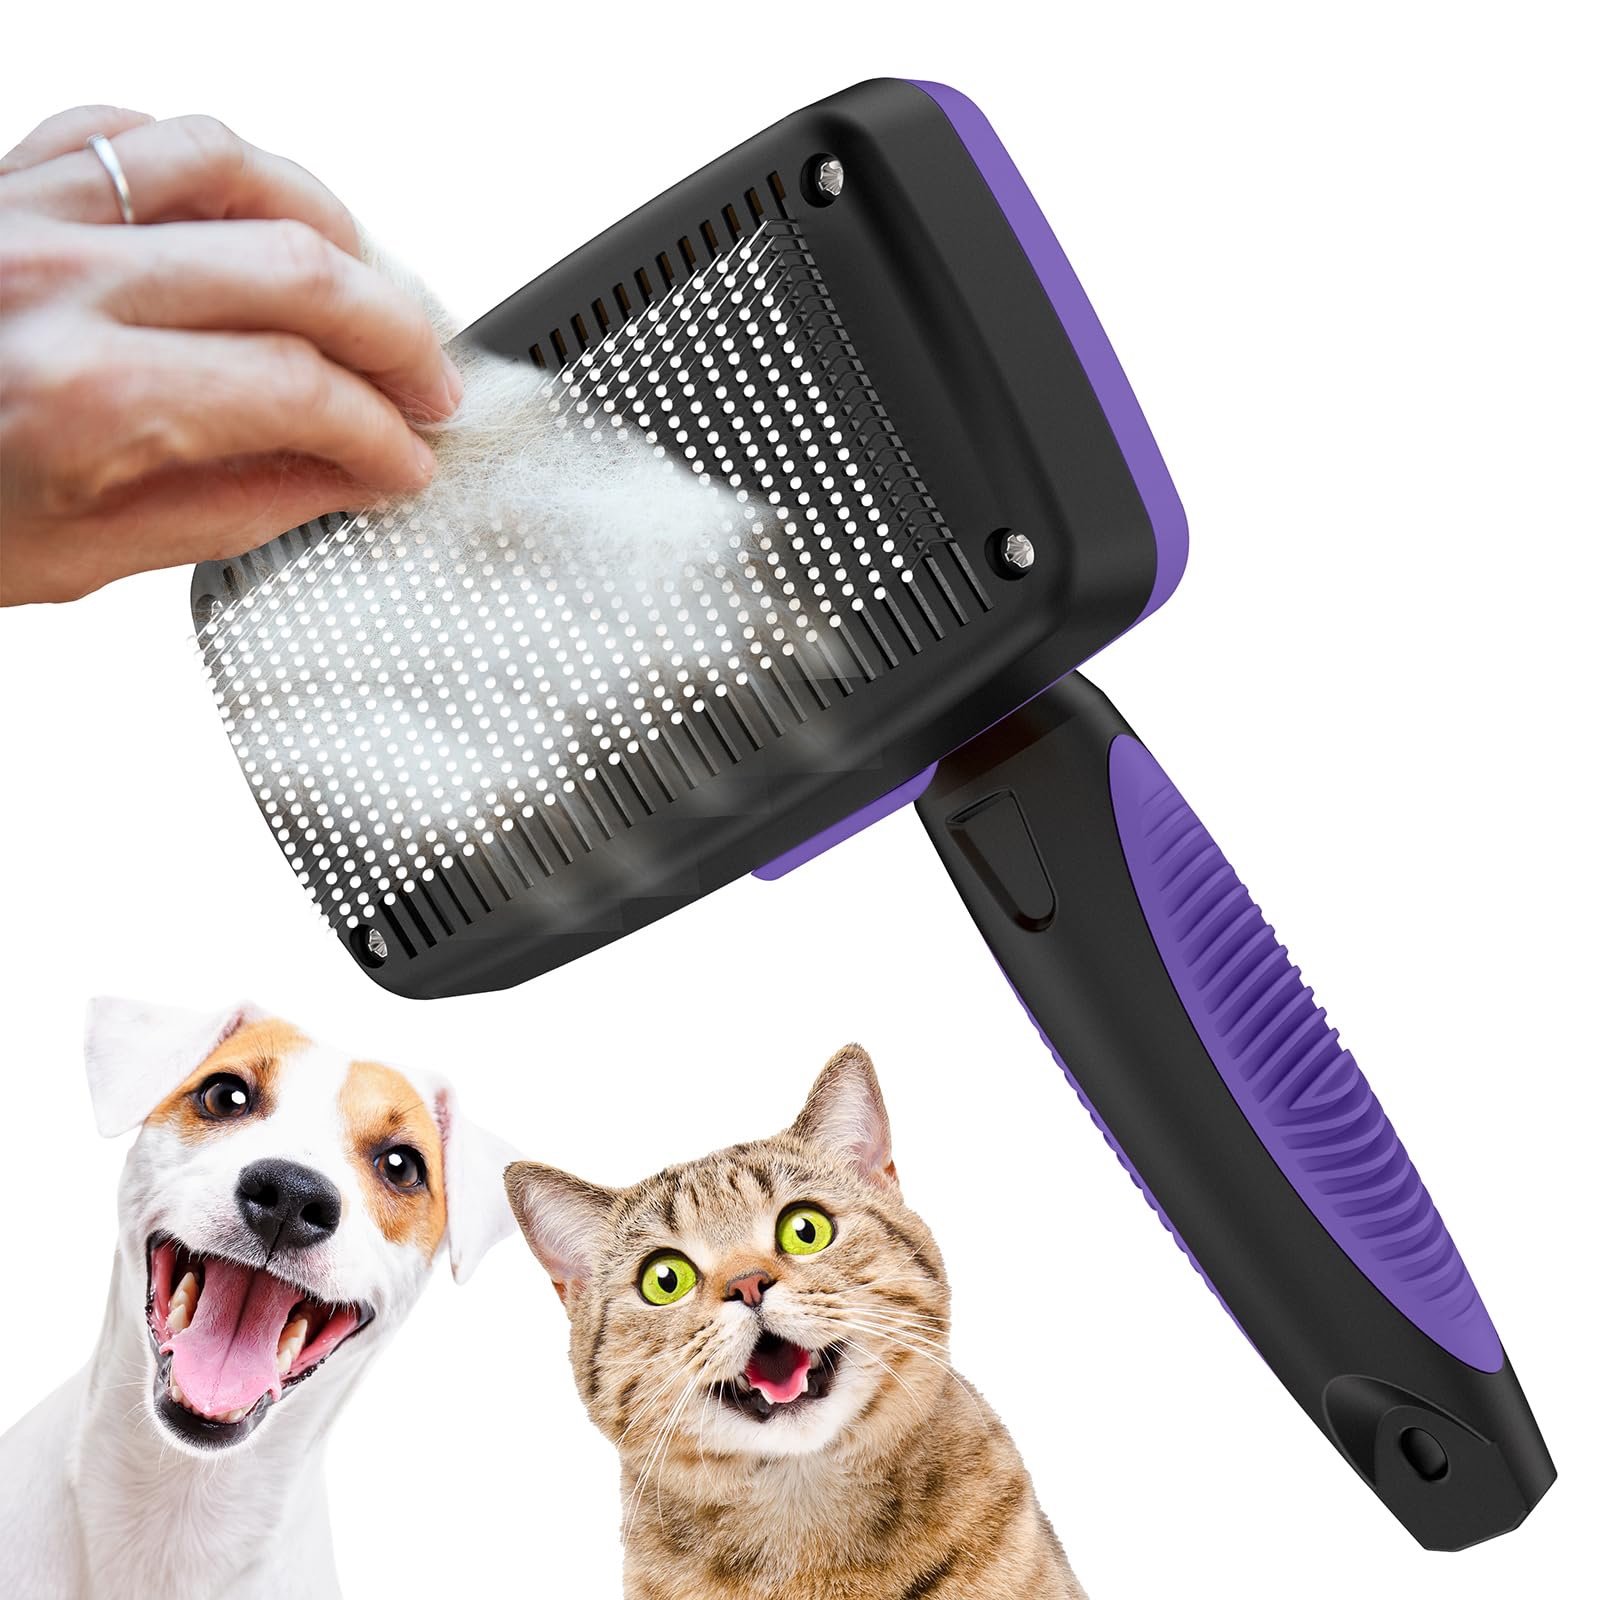 Self-Cleaning Slicker Brush for Dogs & Cats Grooming Combs for Short & Long Hair iK9KgqkqC